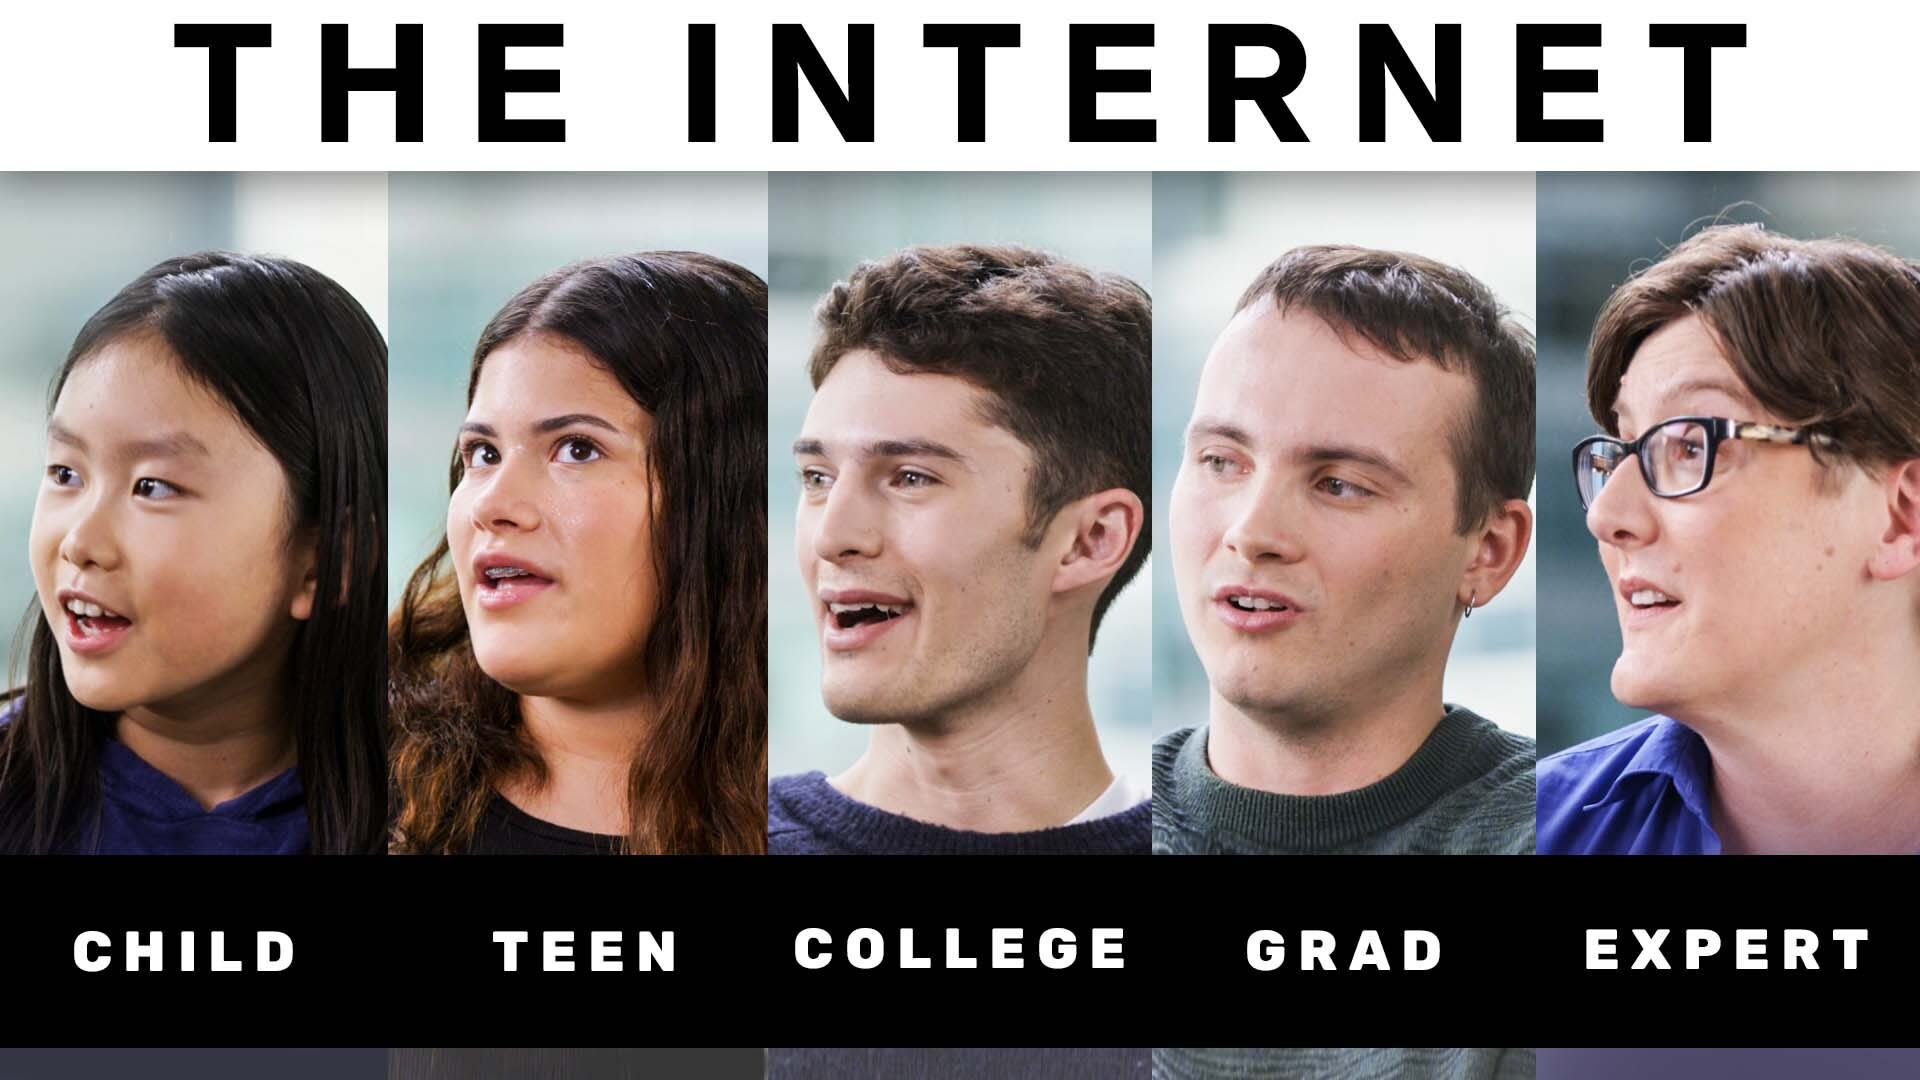 UMass Professor Explains the Internet in 5 Levels of Difficulty